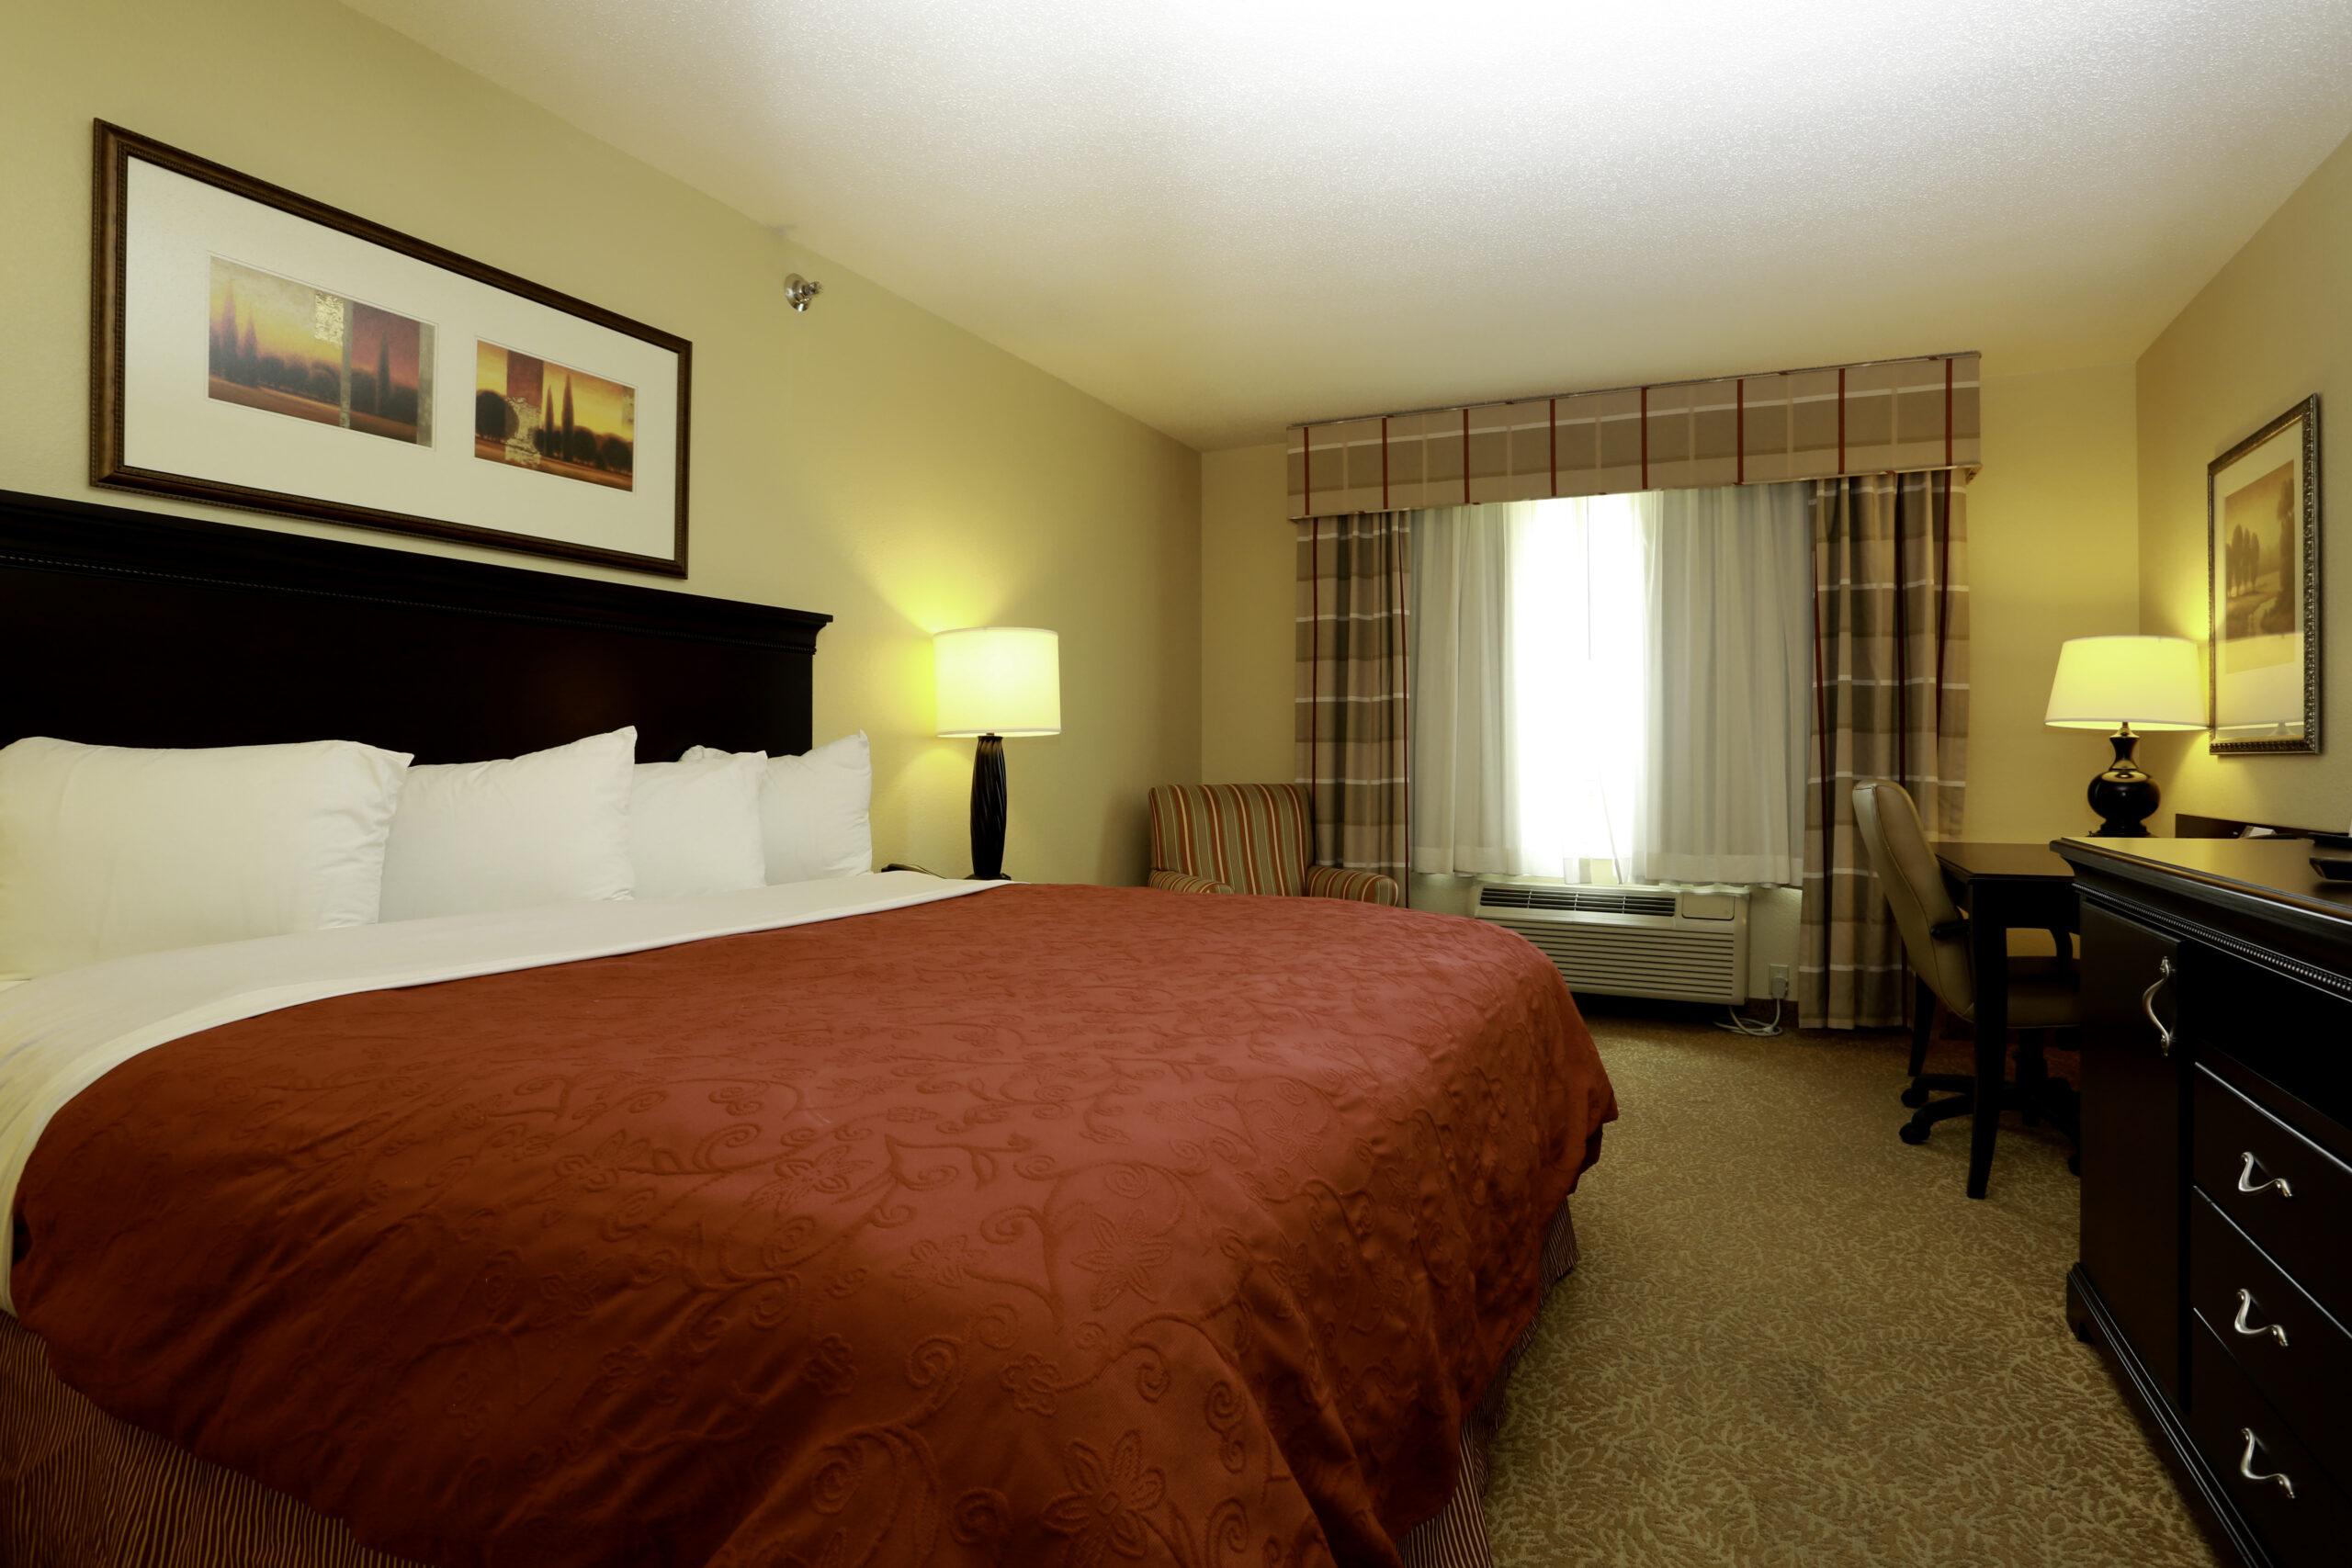 country-inn-and-suites-king-marion-illinois